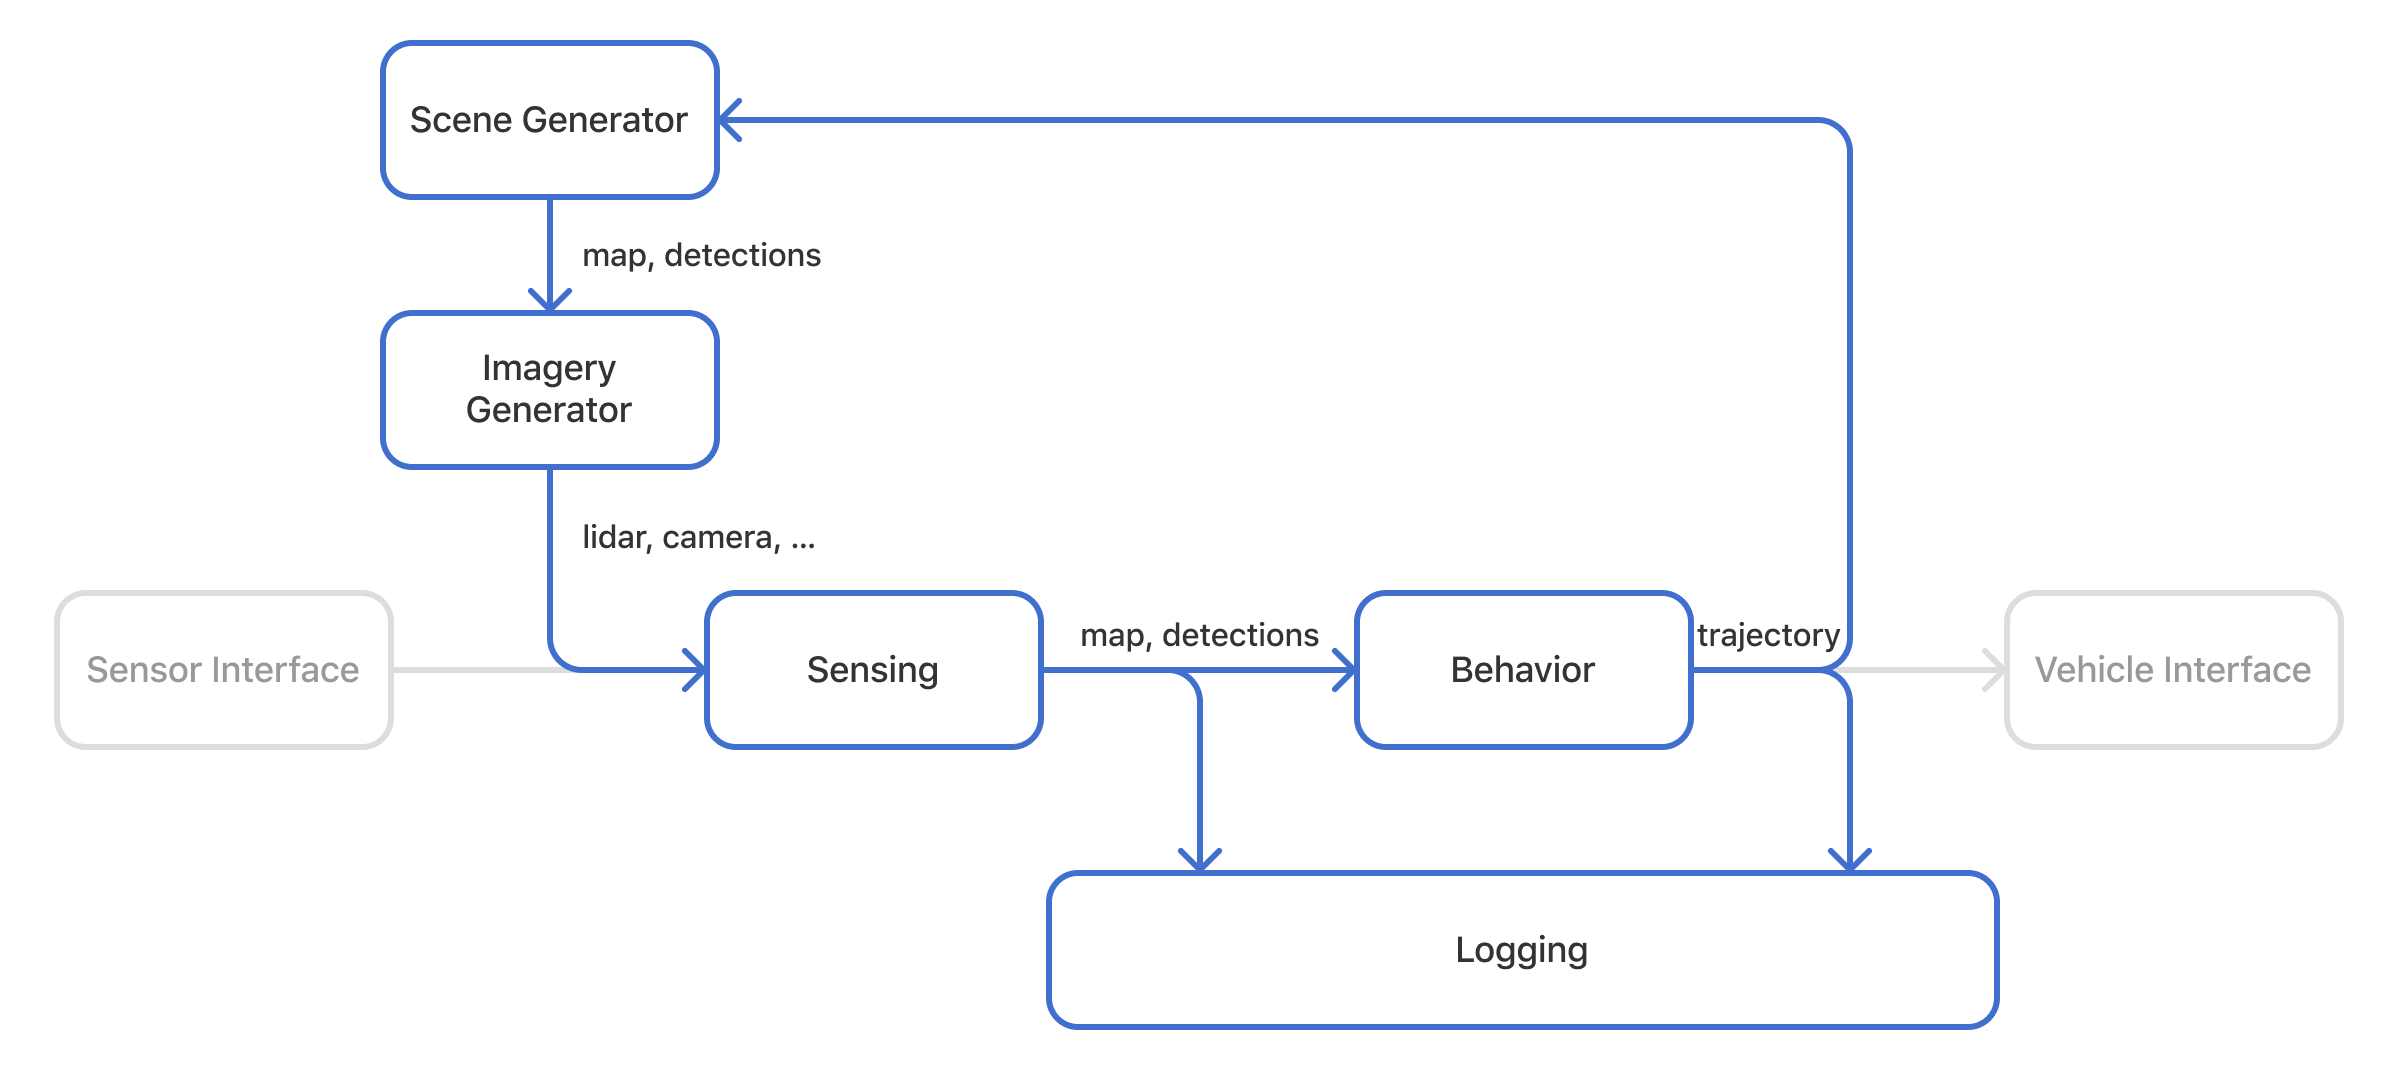 A modified block diagram with an arrow labeled lidar and camera pointing from Scene Generator and Imagery Generator to Sensing. Sensing feeds map and detections into Behavior. The additional components Sensor Interface and Vehicle Interface are drawn in gray.